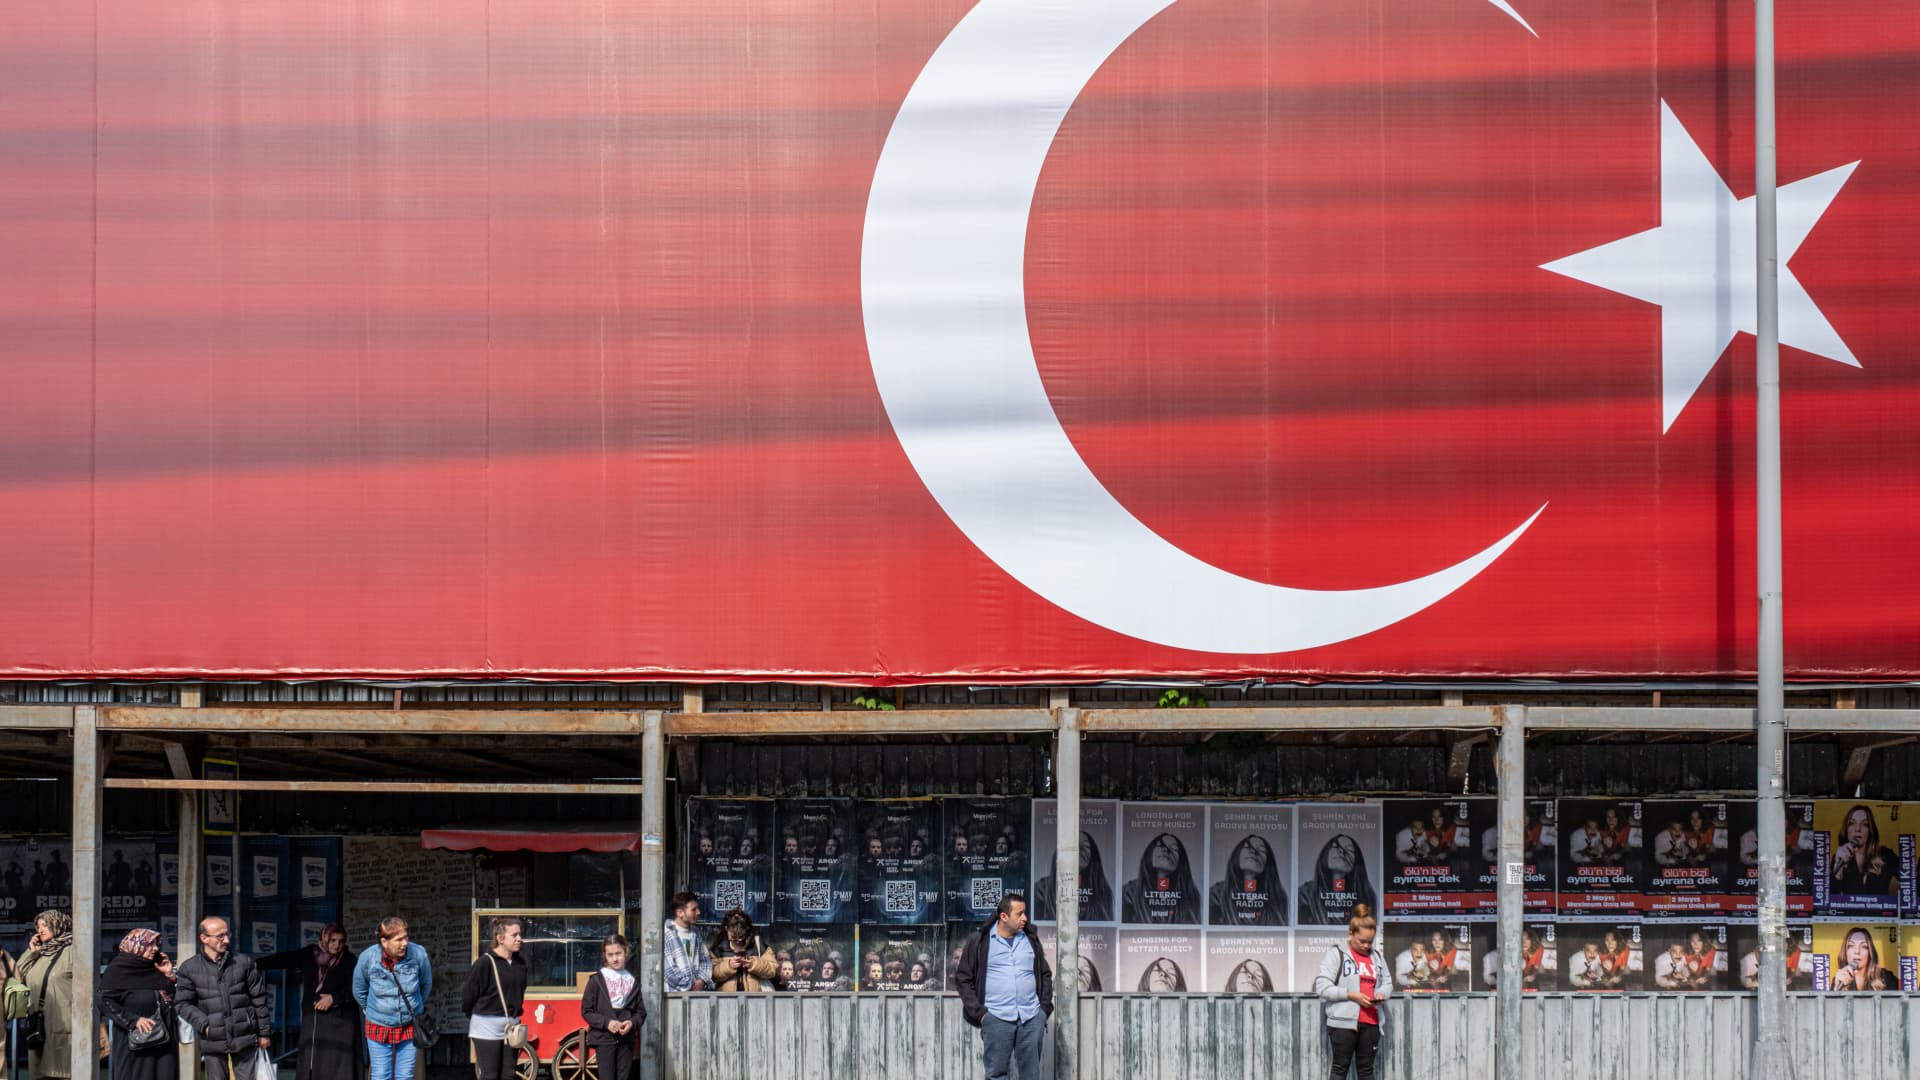 Turkey’s central bank hikes interest rate to 15% in dramatic U-turn to fight inflation